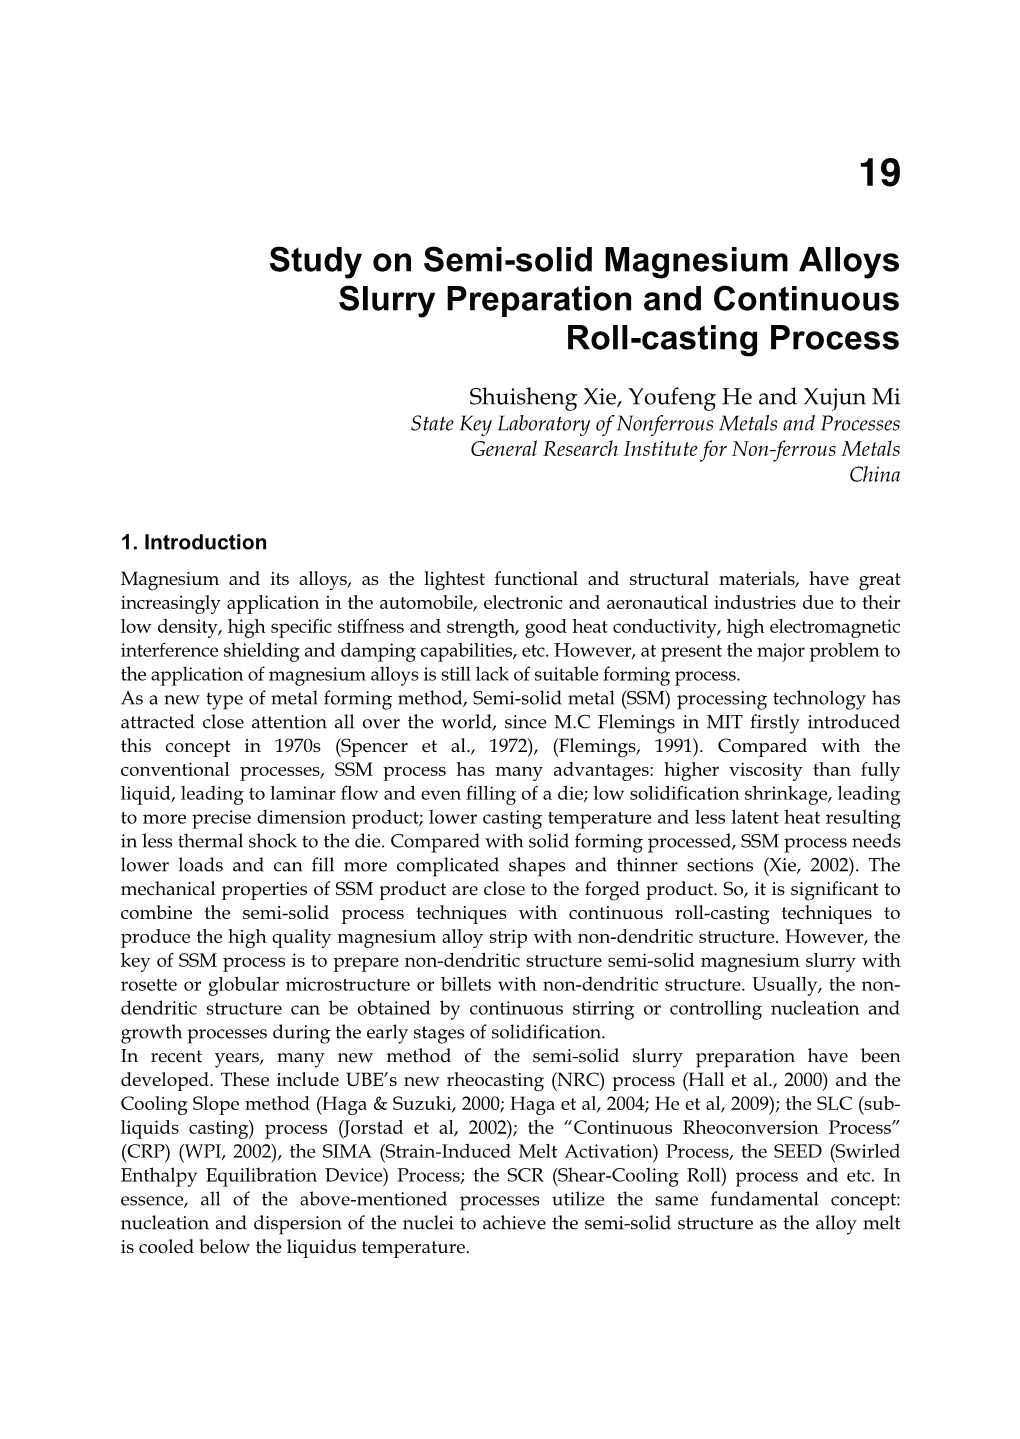 Study on Semi-Solid Magnesium Alloys Slurry Preparation and Continuous Roll-Casting Process